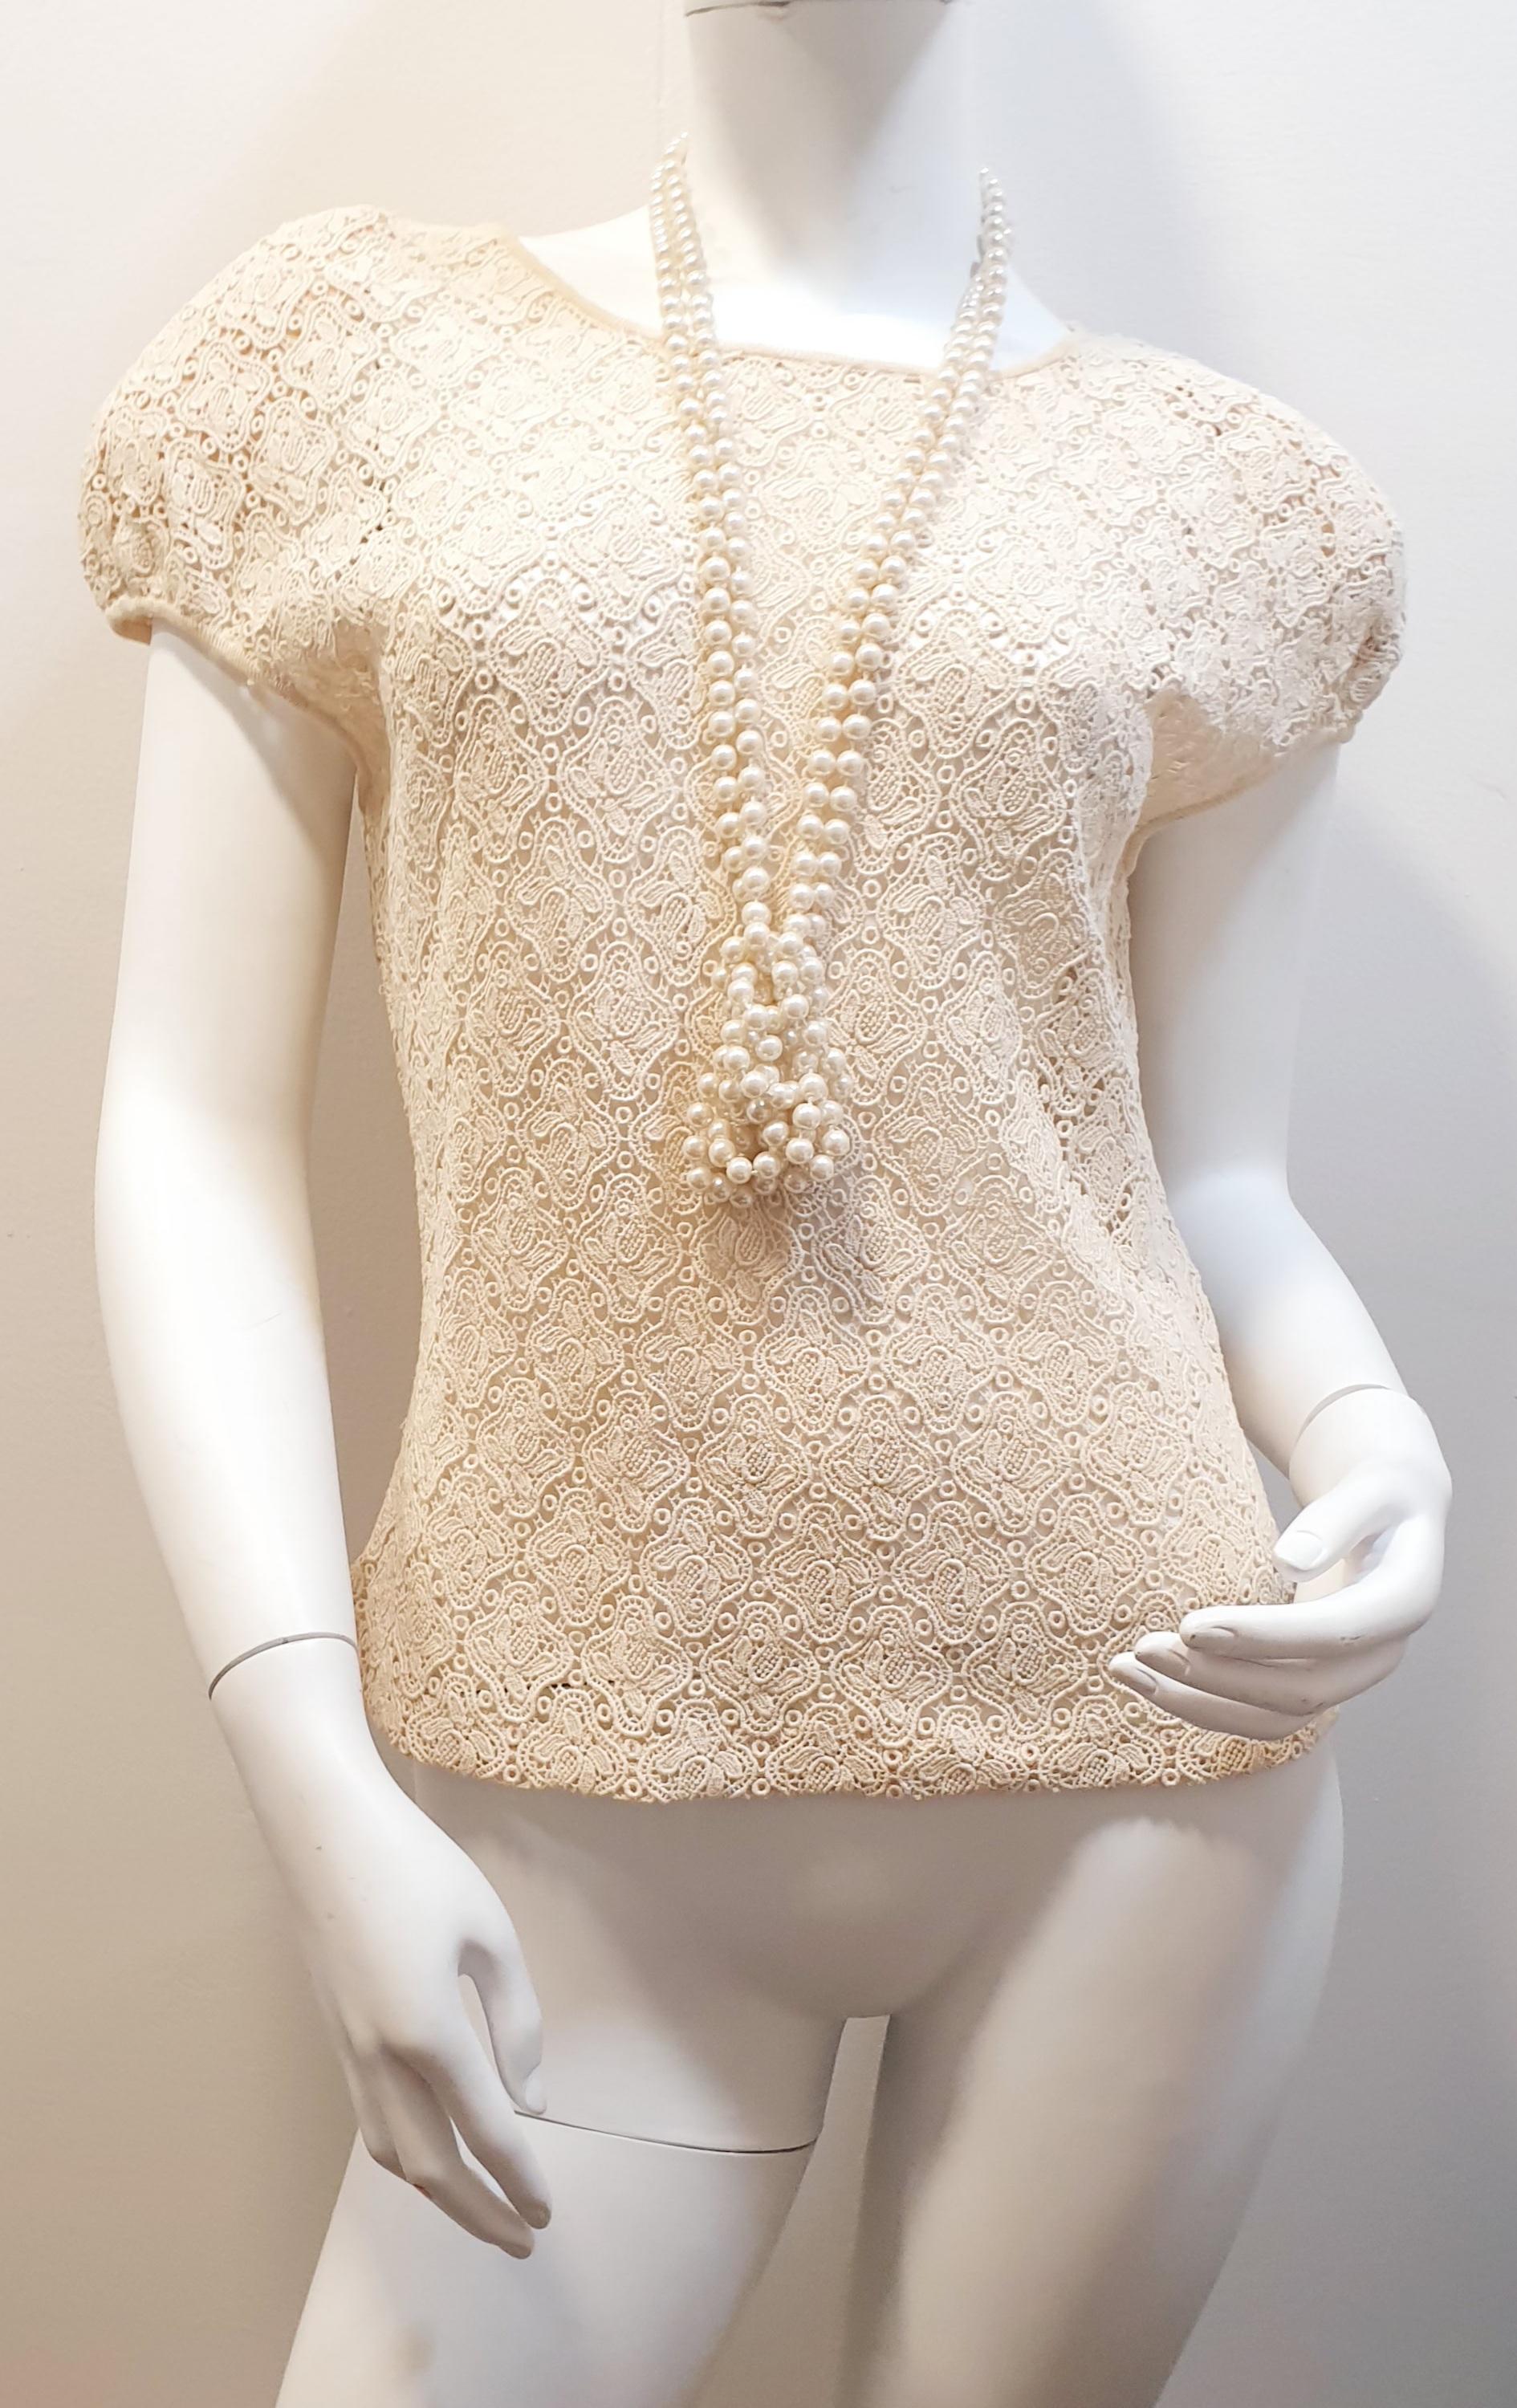 Valentino lace top in a beautiful beige colorway
Material: Lace
Color:  Beige
Designer: Valentino Garavani
Skirt length: 55 cm  21,65 inches
Size : 44
Orders welcome!!  all goods are insured and we package all purchases to a high